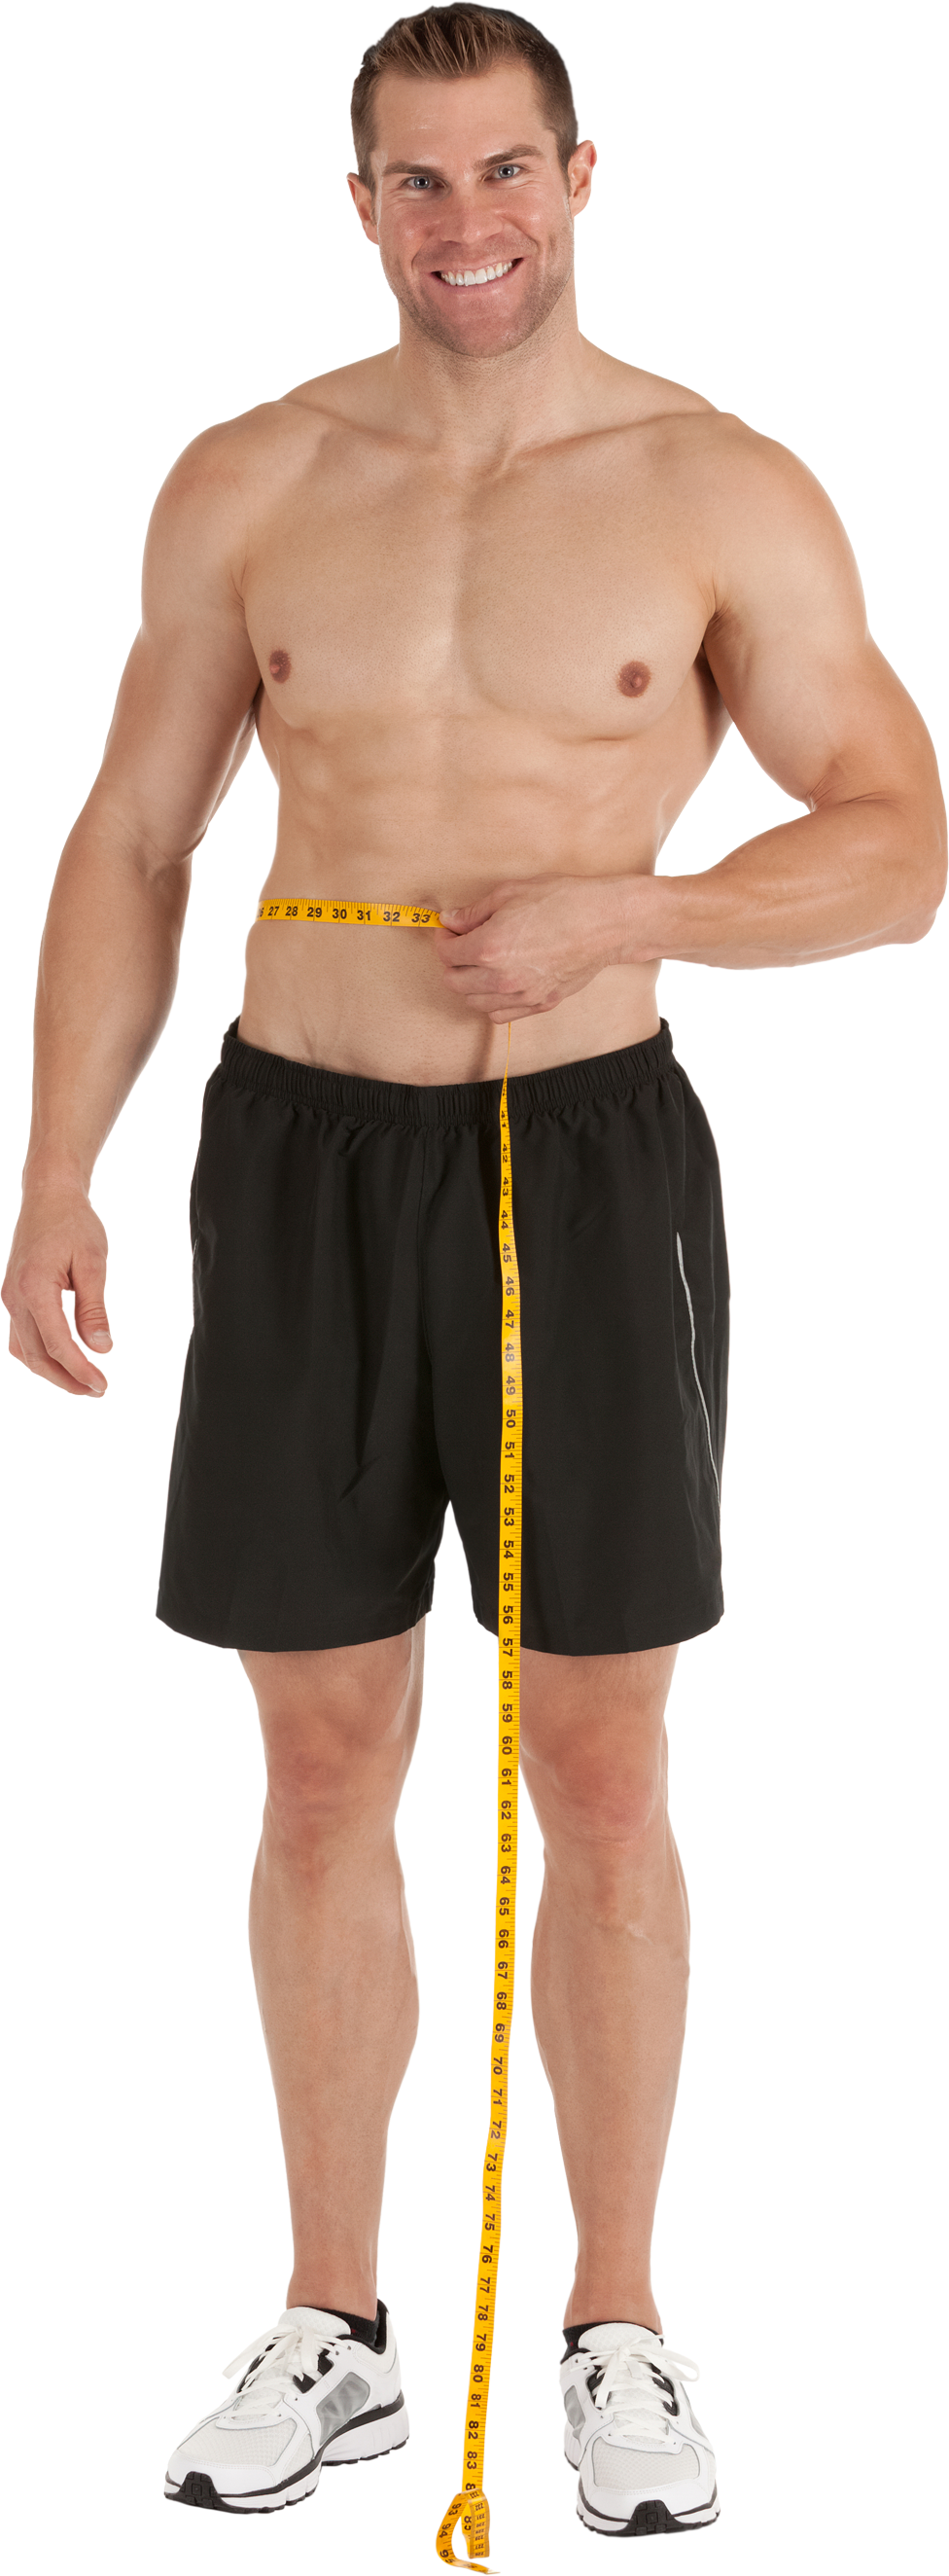 Male with Measuring Tape